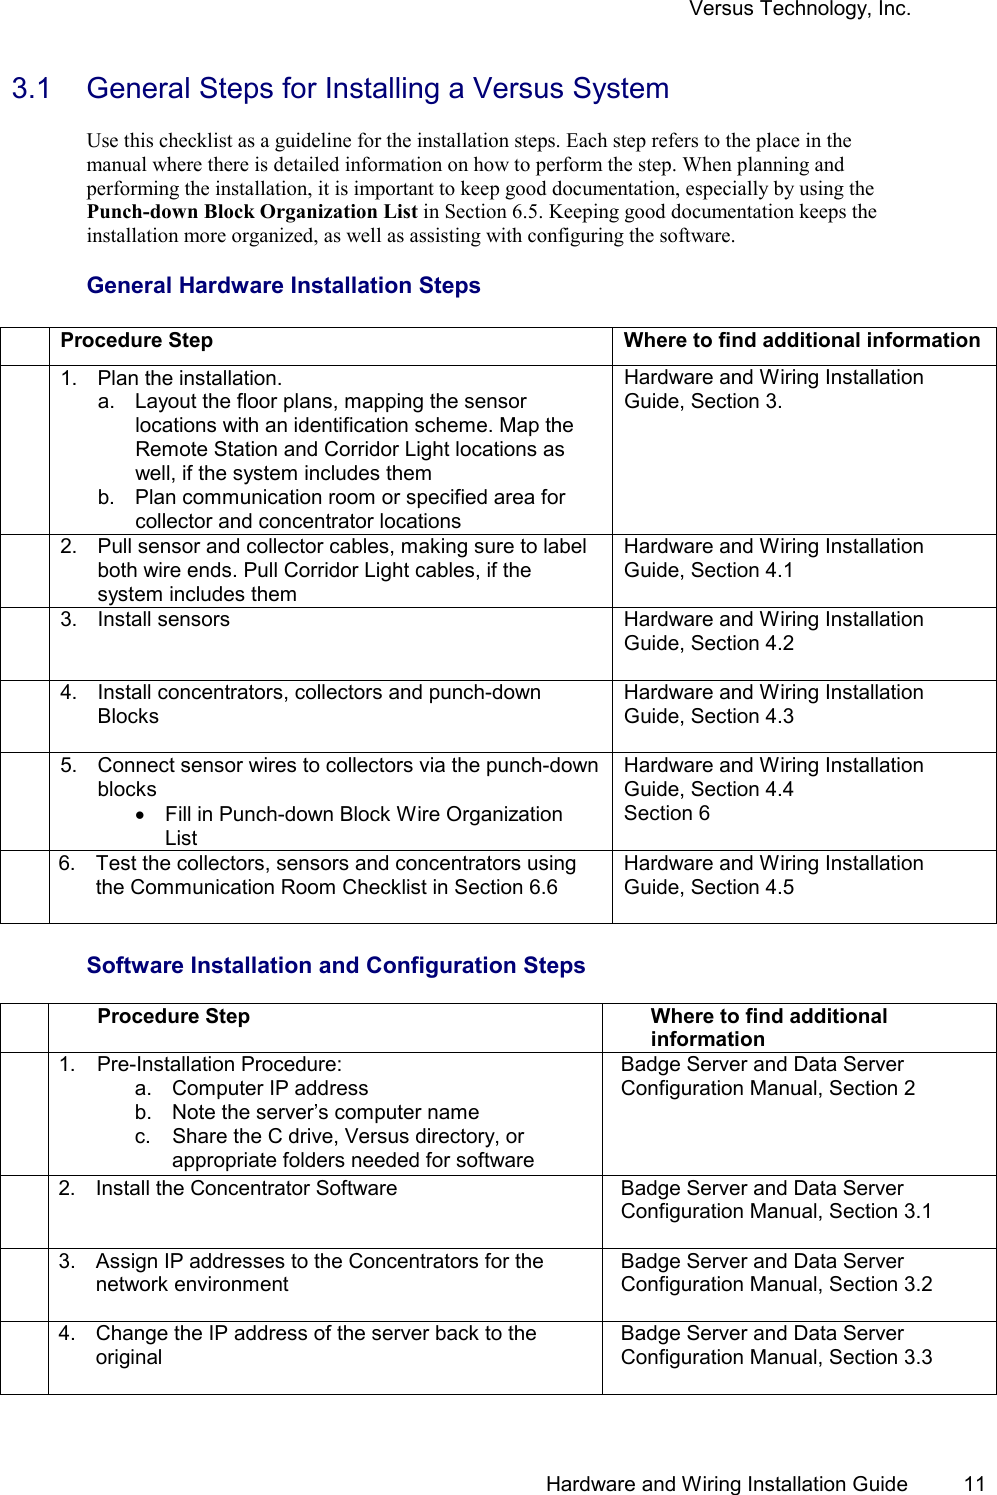 Versus Technology, Inc.   Hardware and Wiring Installation Guide  11 3.1  General Steps for Installing a Versus System  Use this checklist as a guideline for the installation steps. Each step refers to the place in the manual where there is detailed information on how to perform the step. When planning and performing the installation, it is important to keep good documentation, especially by using the Punch-down Block Organization List in Section 6.5. Keeping good documentation keeps the installation more organized, as well as assisting with configuring the software.  General Hardware Installation Steps  Procedure Step  Where to find additional information 1.  Plan the installation.  a.  Layout the floor plans, mapping the sensor locations with an identification scheme. Map the Remote Station and Corridor Light locations as well, if the system includes them b.  Plan communication room or specified area for collector and concentrator locations Hardware and Wiring Installation Guide, Section 3. 2.  Pull sensor and collector cables, making sure to label both wire ends. Pull Corridor Light cables, if the system includes them Hardware and Wiring Installation Guide, Section 4.1 3. Install sensors  Hardware and Wiring Installation Guide, Section 4.2 4.  Install concentrators, collectors and punch-down Blocks   Hardware and Wiring Installation Guide, Section 4.3 5.  Connect sensor wires to collectors via the punch-down blocks •  Fill in Punch-down Block Wire Organization List Hardware and Wiring Installation Guide, Section 4.4 Section 6 6.  Test the collectors, sensors and concentrators using the Communication Room Checklist in Section 6.6 Hardware and Wiring Installation Guide, Section 4.5  Software Installation and Configuration Steps  Procedure Step  Where to find additional information 1. Pre-Installation Procedure: a.  Computer IP address b.  Note the server’s computer name c.  Share the C drive, Versus directory, or appropriate folders needed for software Badge Server and Data Server Configuration Manual, Section 2 2.  Install the Concentrator Software  Badge Server and Data Server Configuration Manual, Section 3.1 3.  Assign IP addresses to the Concentrators for the network environment Badge Server and Data Server Configuration Manual, Section 3.2 4.  Change the IP address of the server back to the original  Badge Server and Data Server Configuration Manual, Section 3.3 